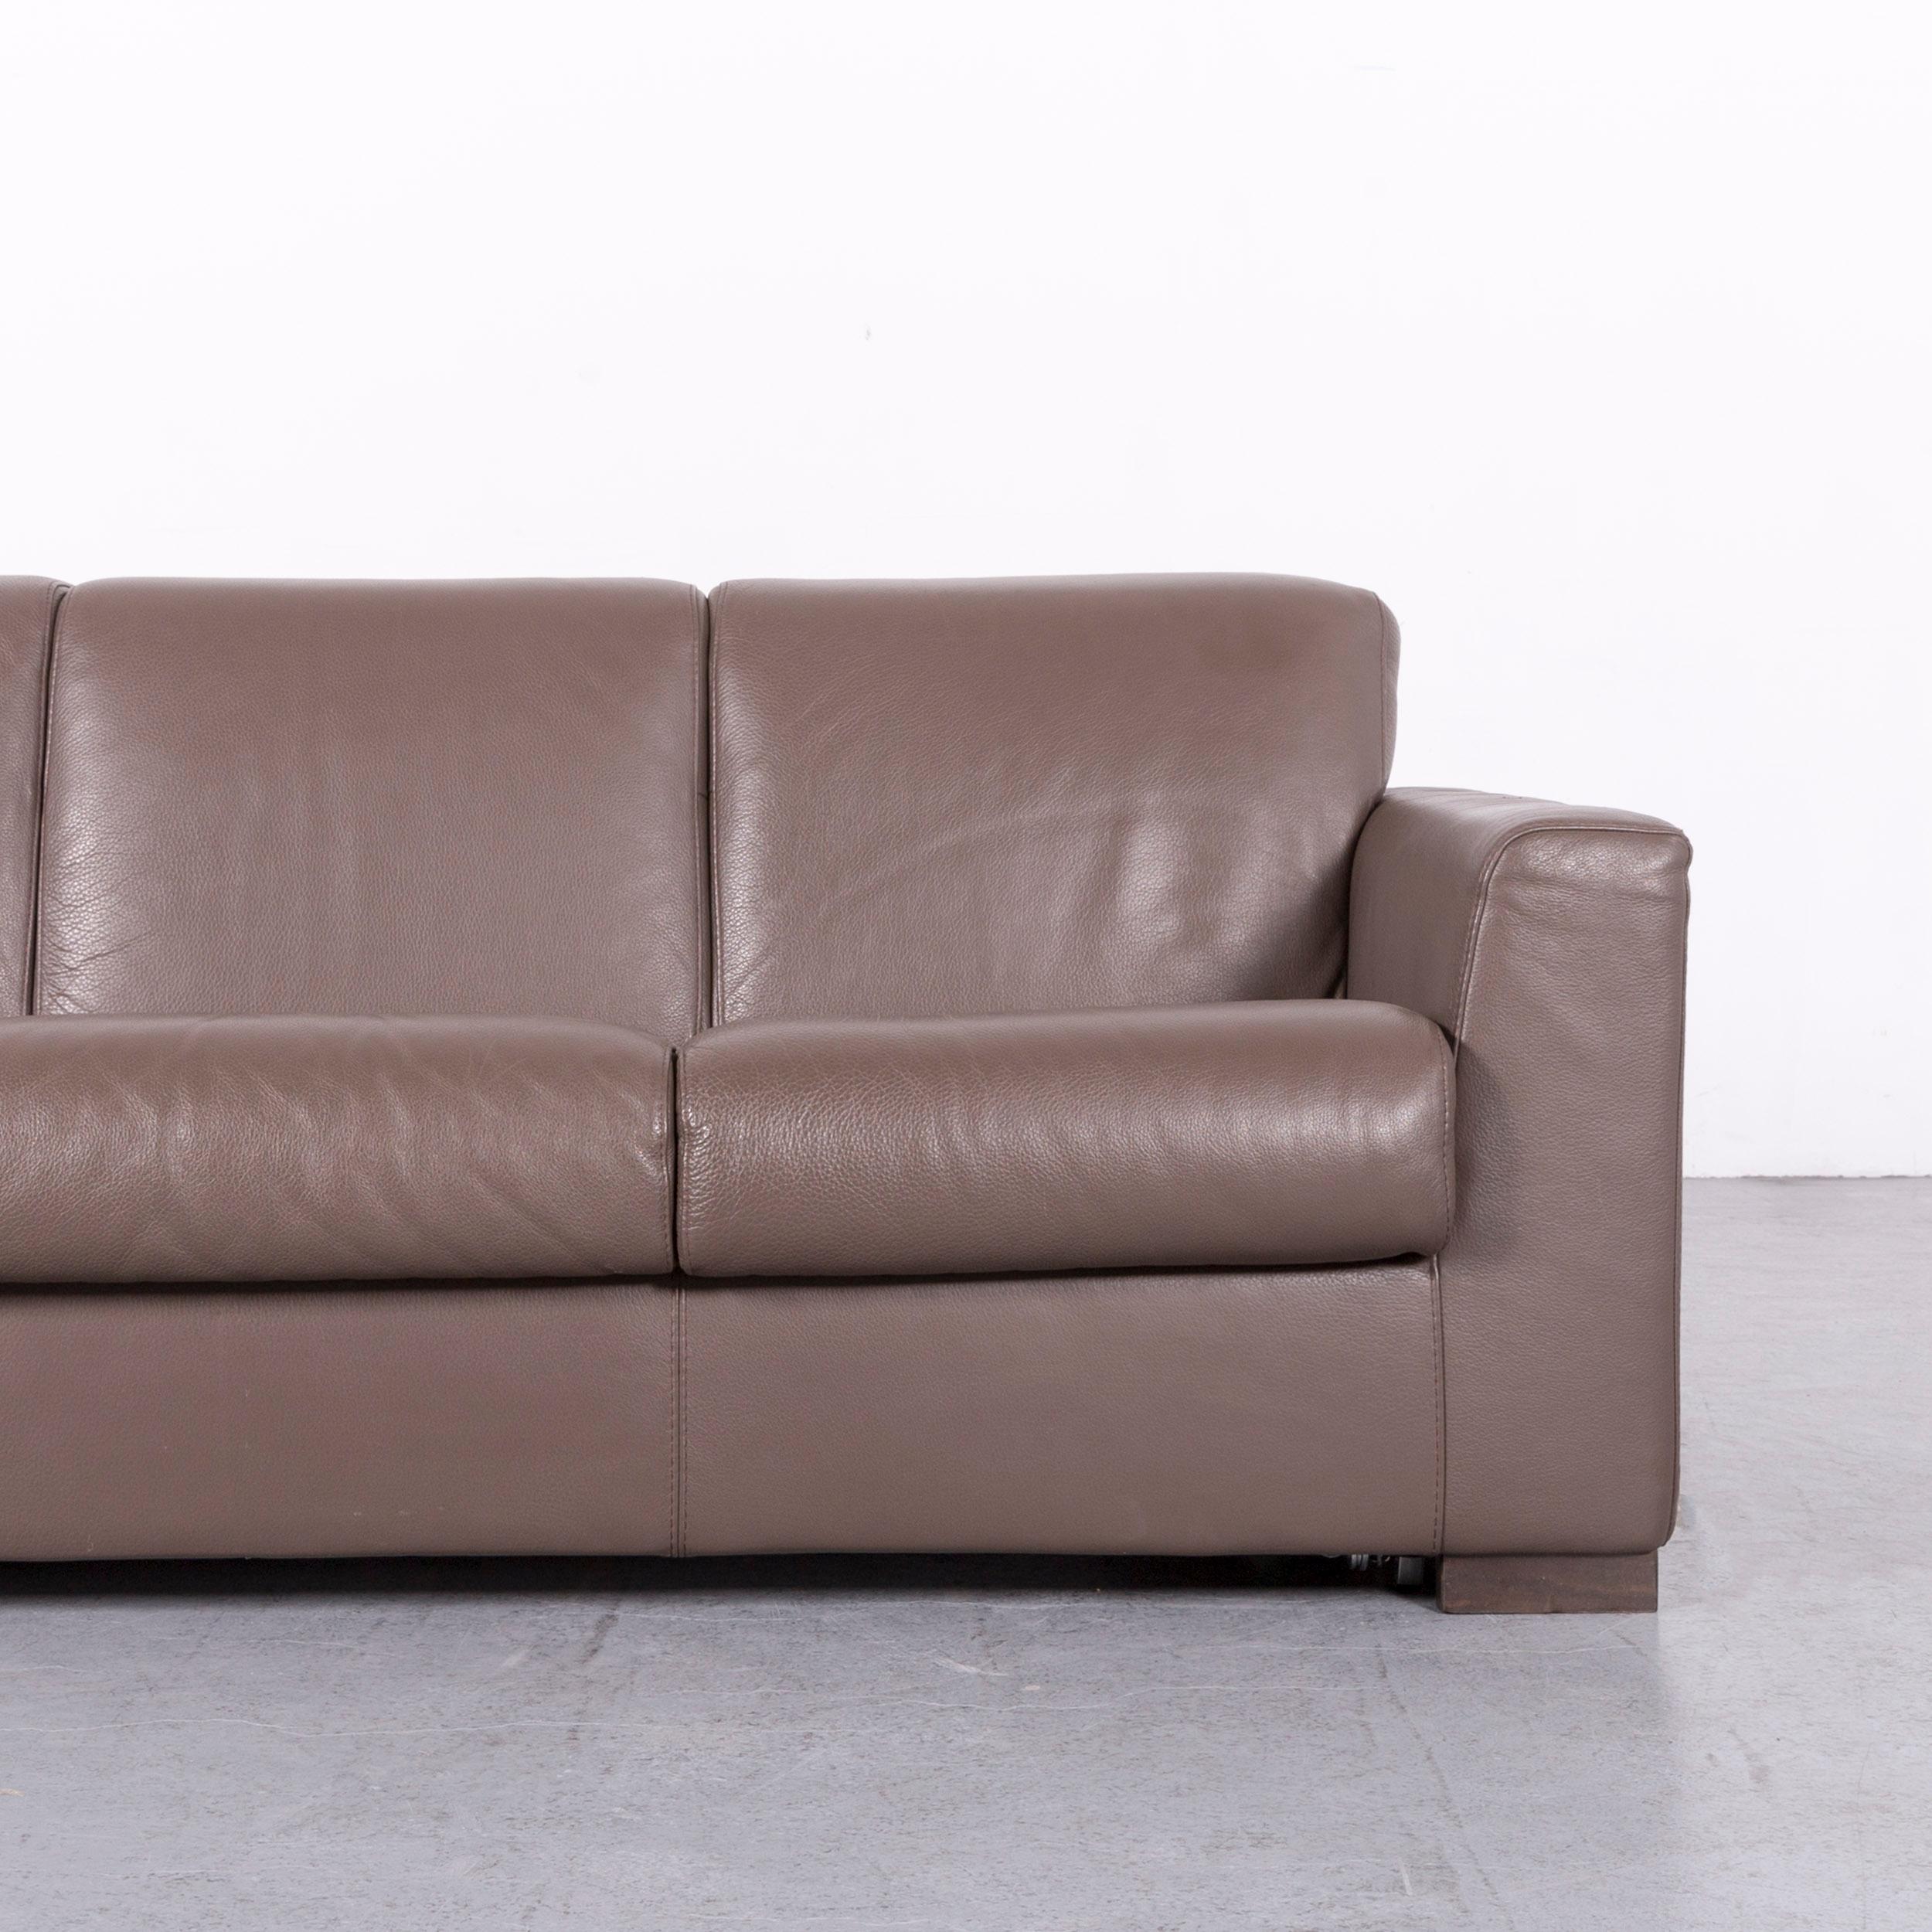 Contemporary Natuzzi Designer Leather Sofa Three-Seat Couch Brown with Sleep Function